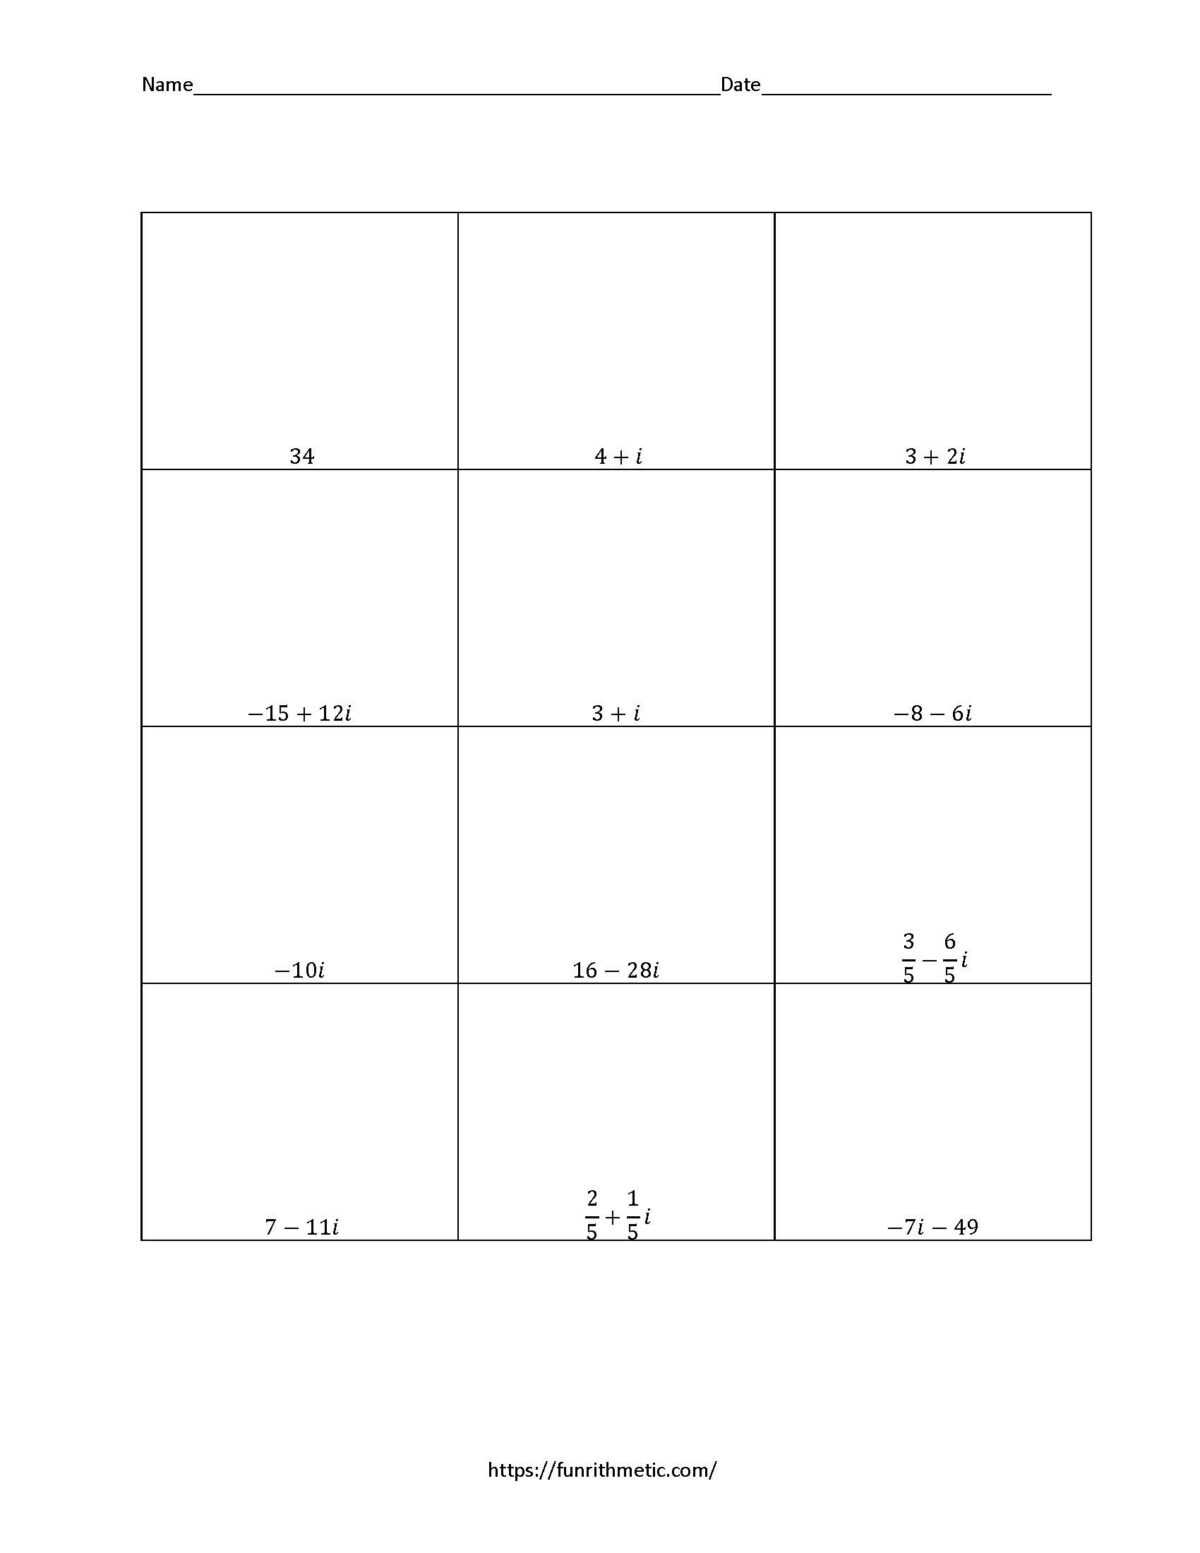 operations with complex numbers worksheet